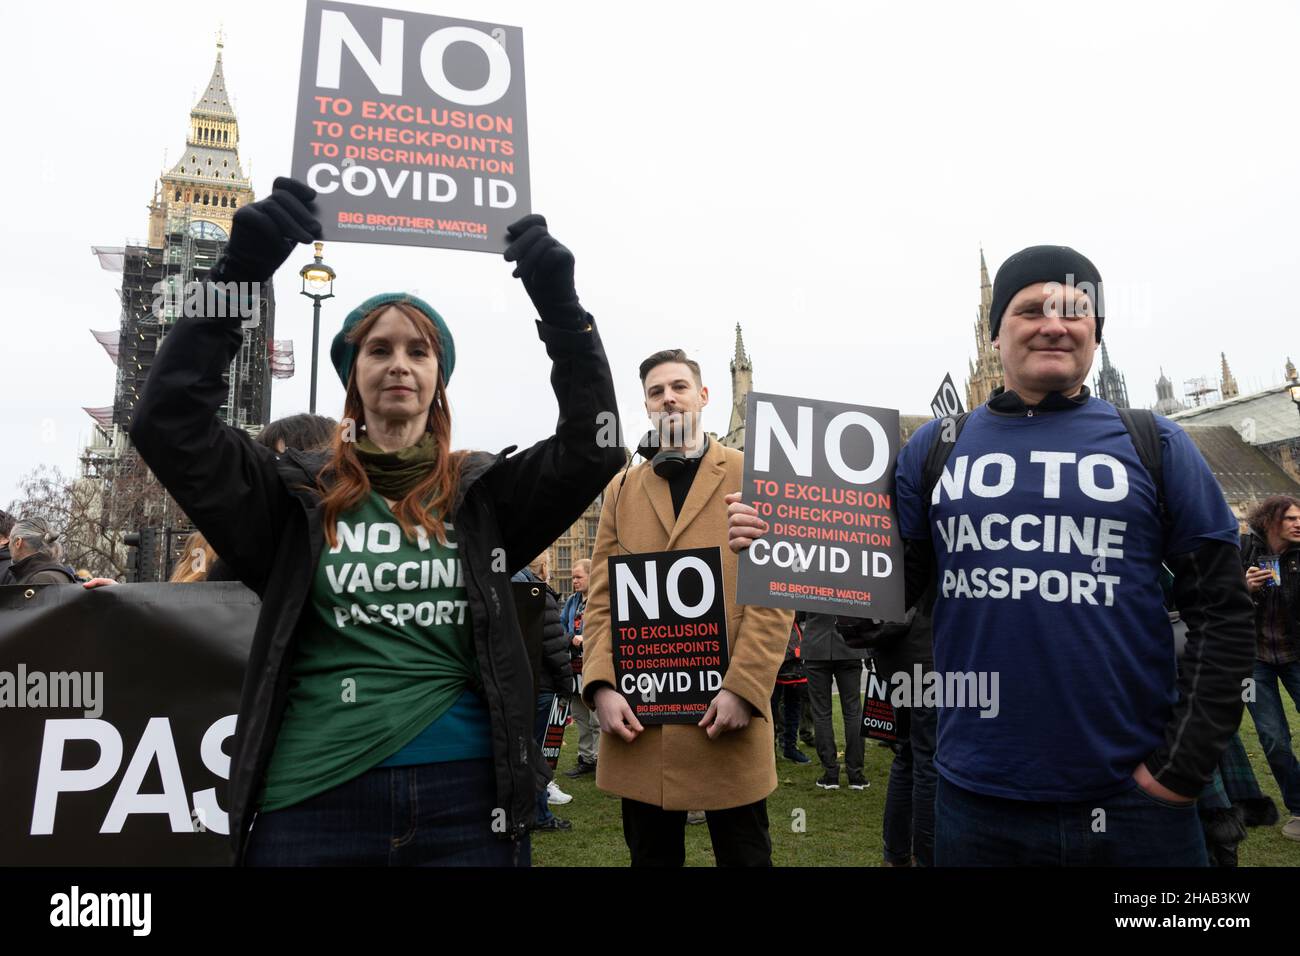 Protestors seen holding placards that say 'No to exclusion, to checkpoints, to discrimination, COVID ID' and wearing shirts that say 'No to vaccine passports' during the demonstration.Jointly led by Big Brother Watch and Migrant Organise, protestors gathered to voice discontent in relation to the UK government's attempt to make vaccine passports and other forms of COVID IDs a requisite for large scale events and entry into public spaces. The group seeks to clearly delineate the difference between anti vaccine passports specifically and anti vaccines, with which they identify with the former. ( Stock Photo